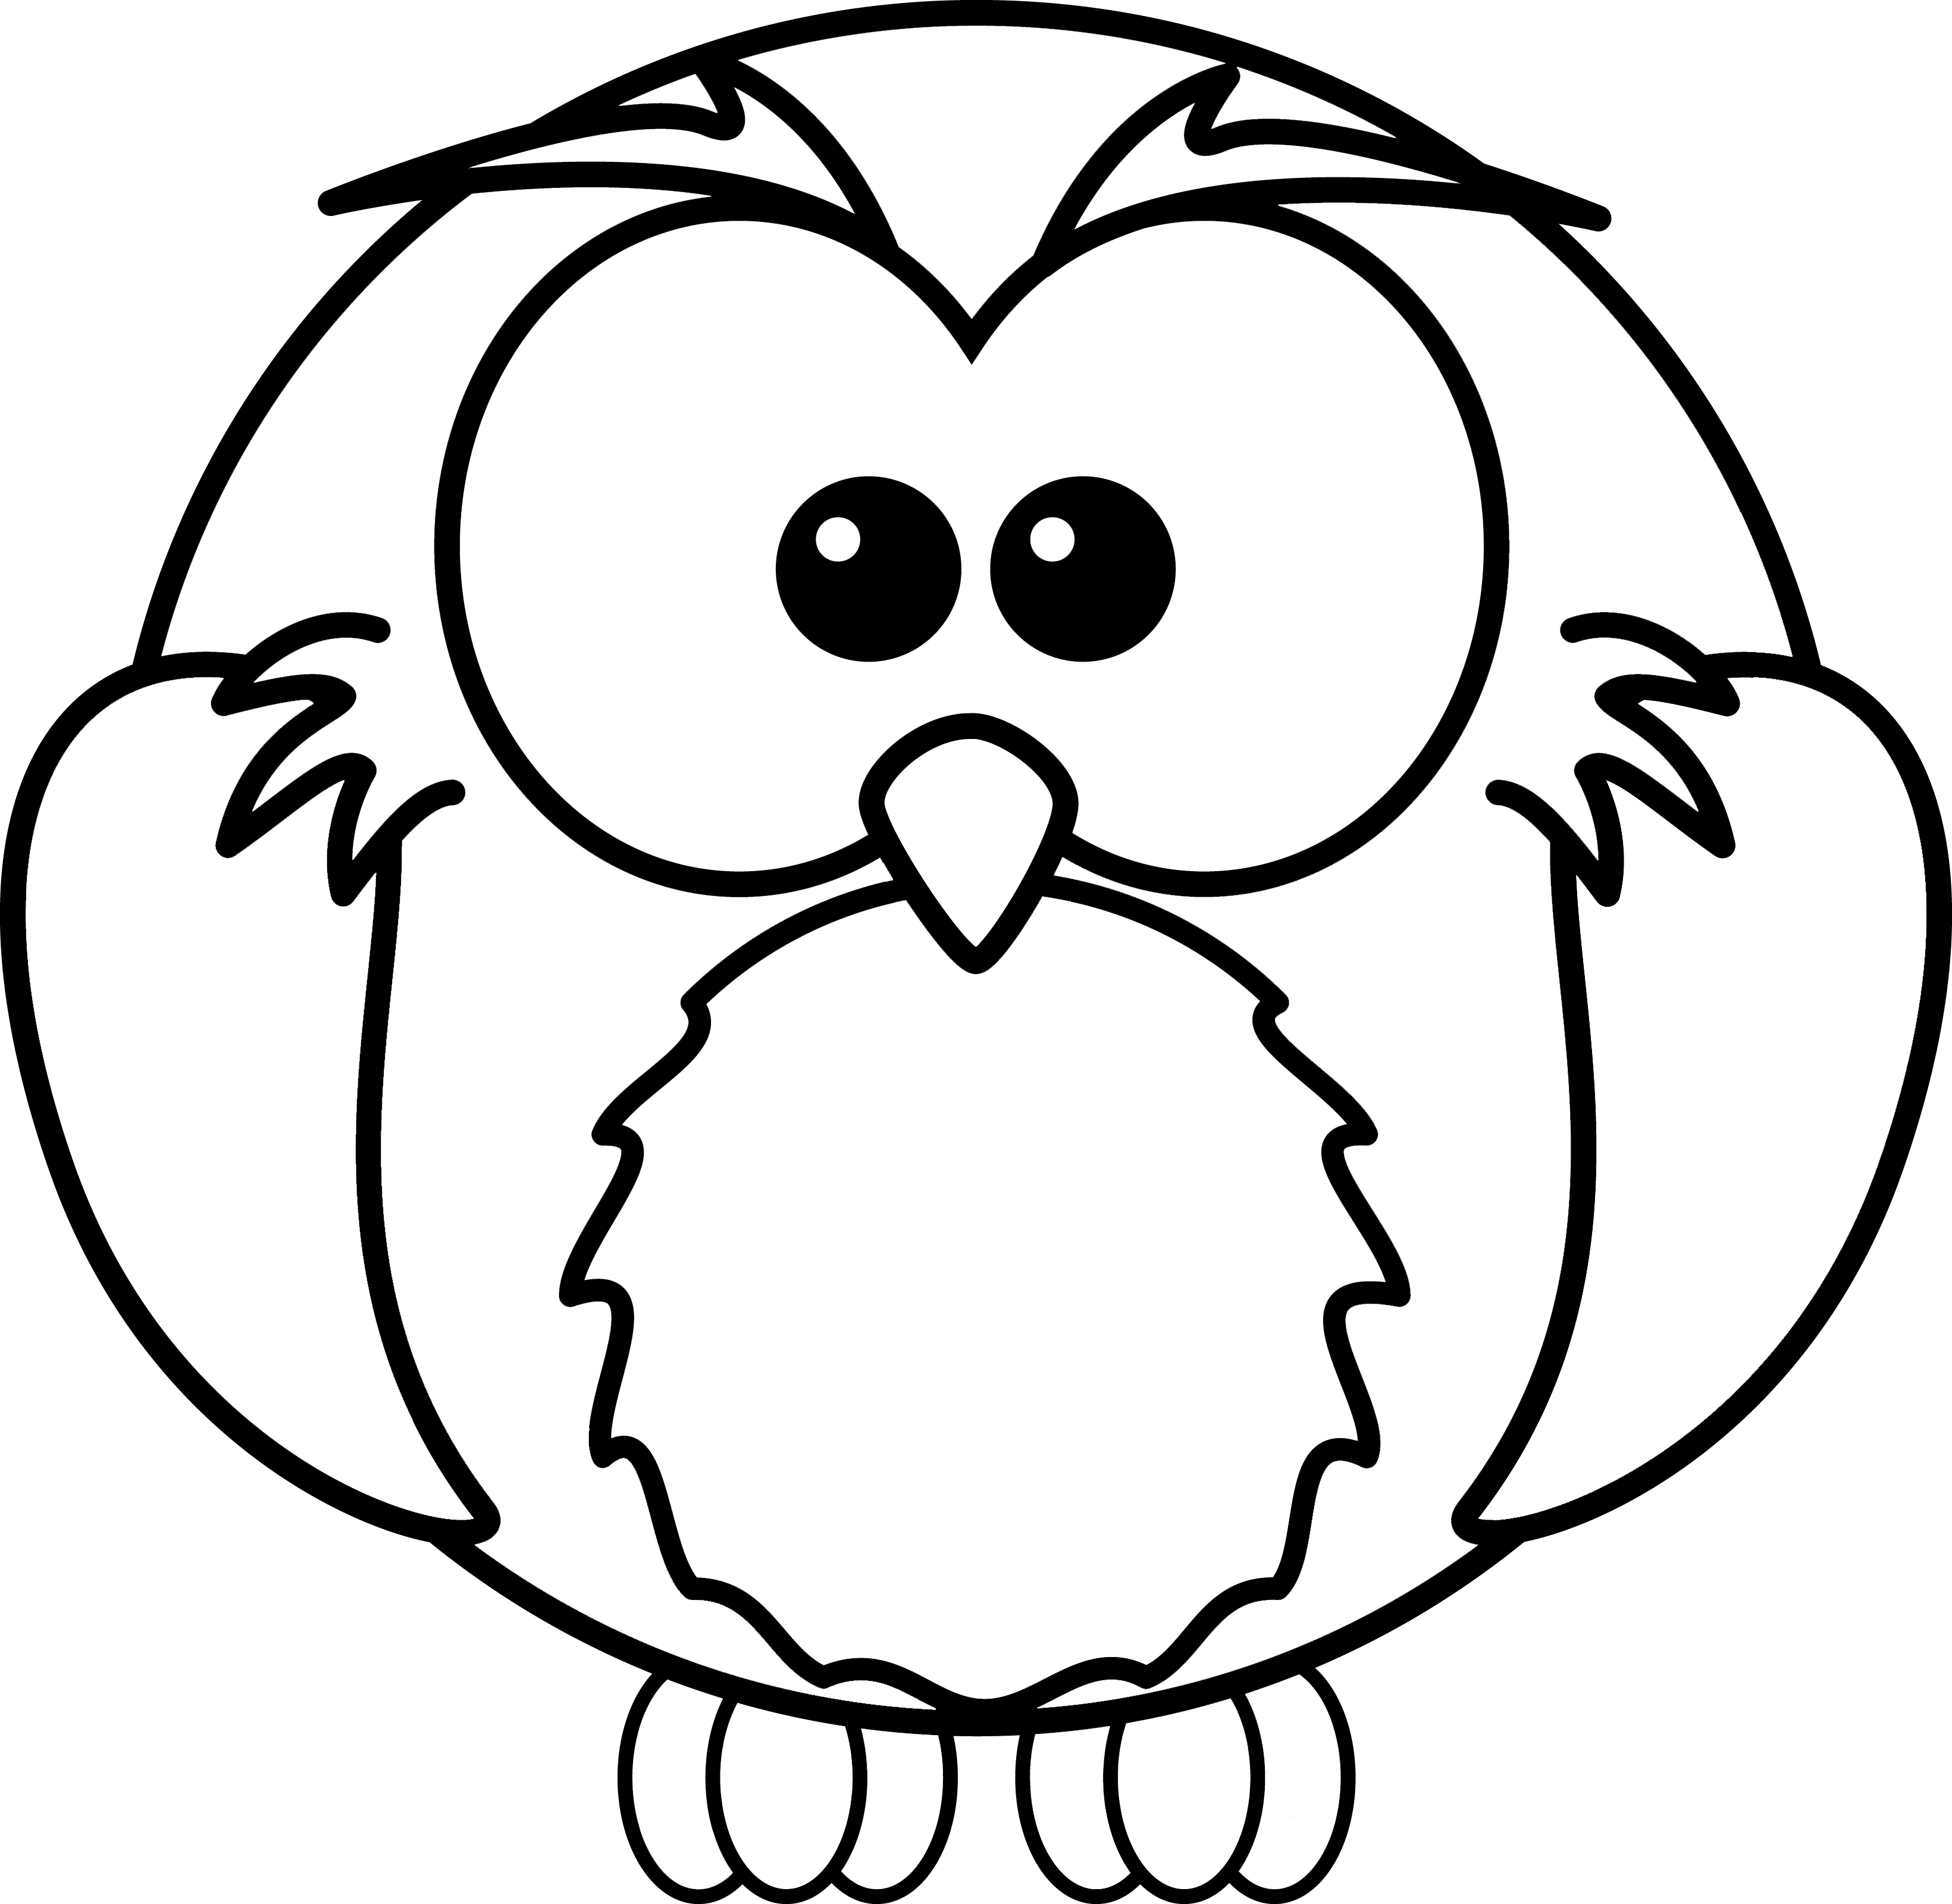 Cute Halloween Owl Clip Art - Free Clipart Images